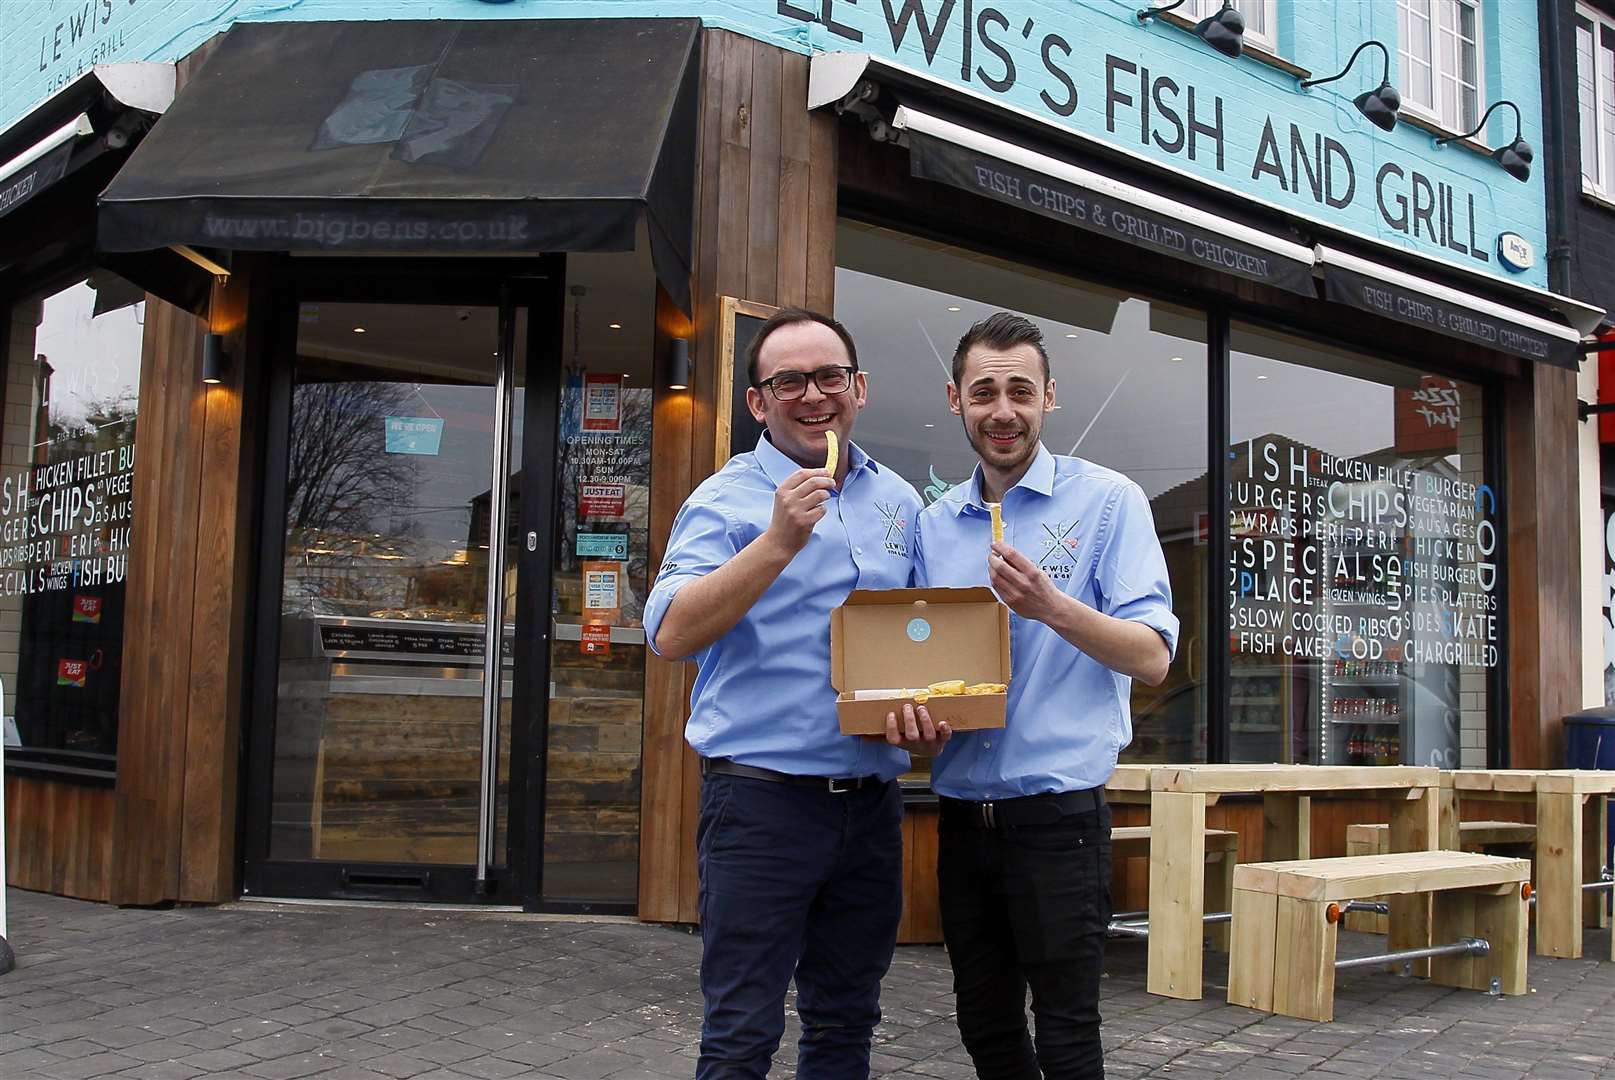 Lewis Fish and Grill, Loose Road, MaidstoneGavin Lewis (left) and brother Graig.Picture: Sean Aidan (8017055)